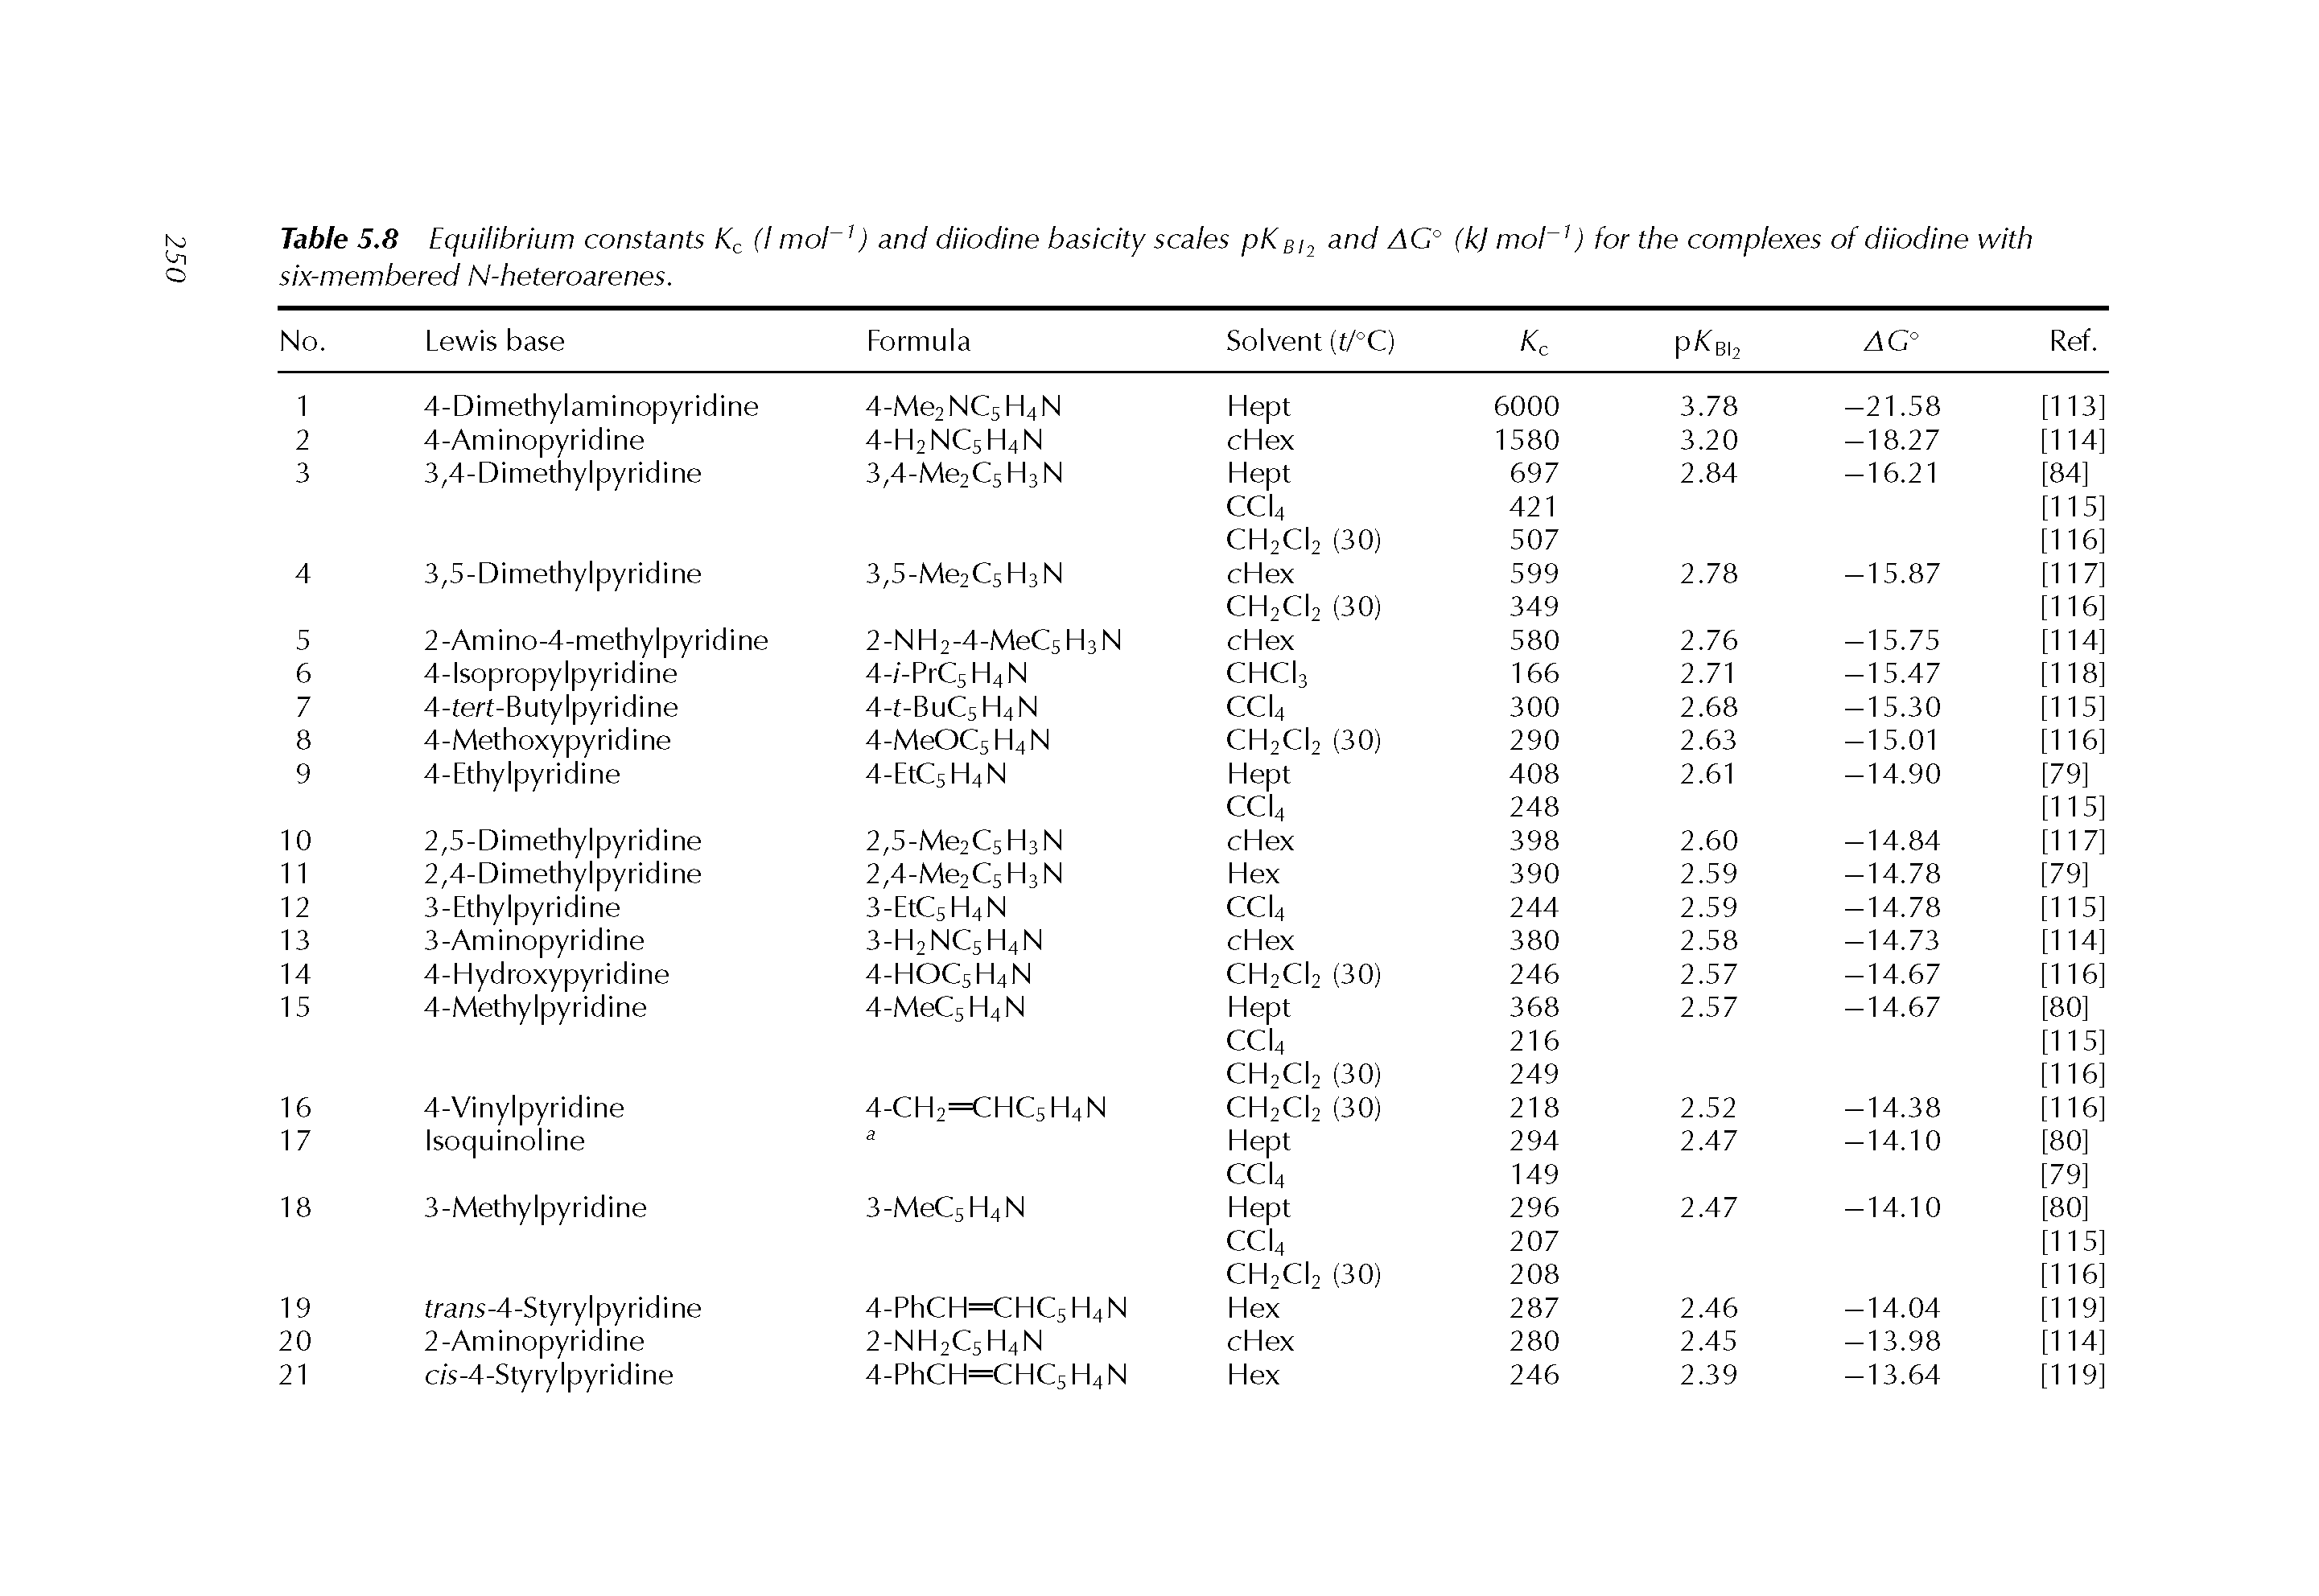 Table 5.5 Equilibrium constants (I mol 0 and diiodine basicity scales pKgo 3/7 J AG° (kj mol 0 for the complexes of diiodine with six-membered N-heteroarenes.